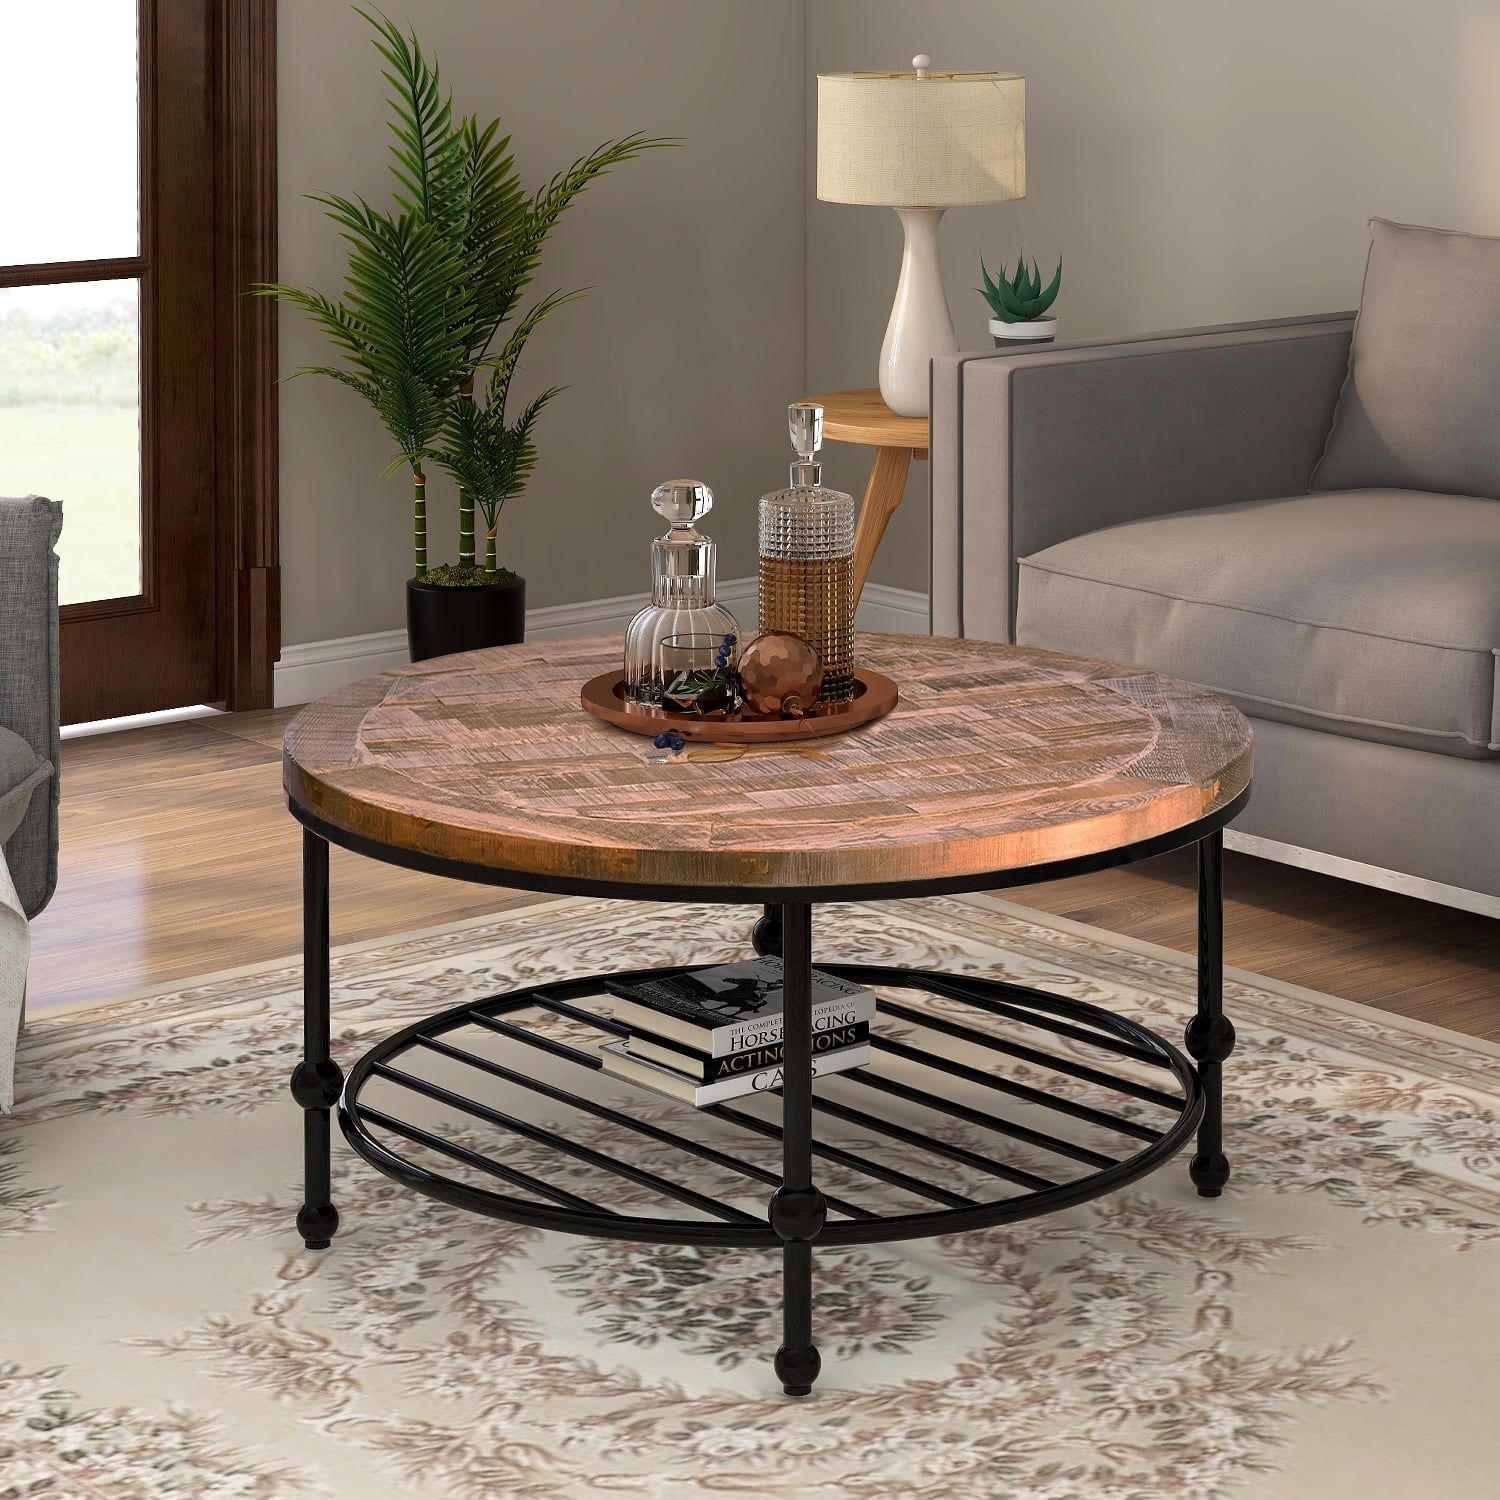 Rustic Natural Round Coffee Table With Storage Shelf For Living Room Inside Round Coffee Tables (View 7 of 15)